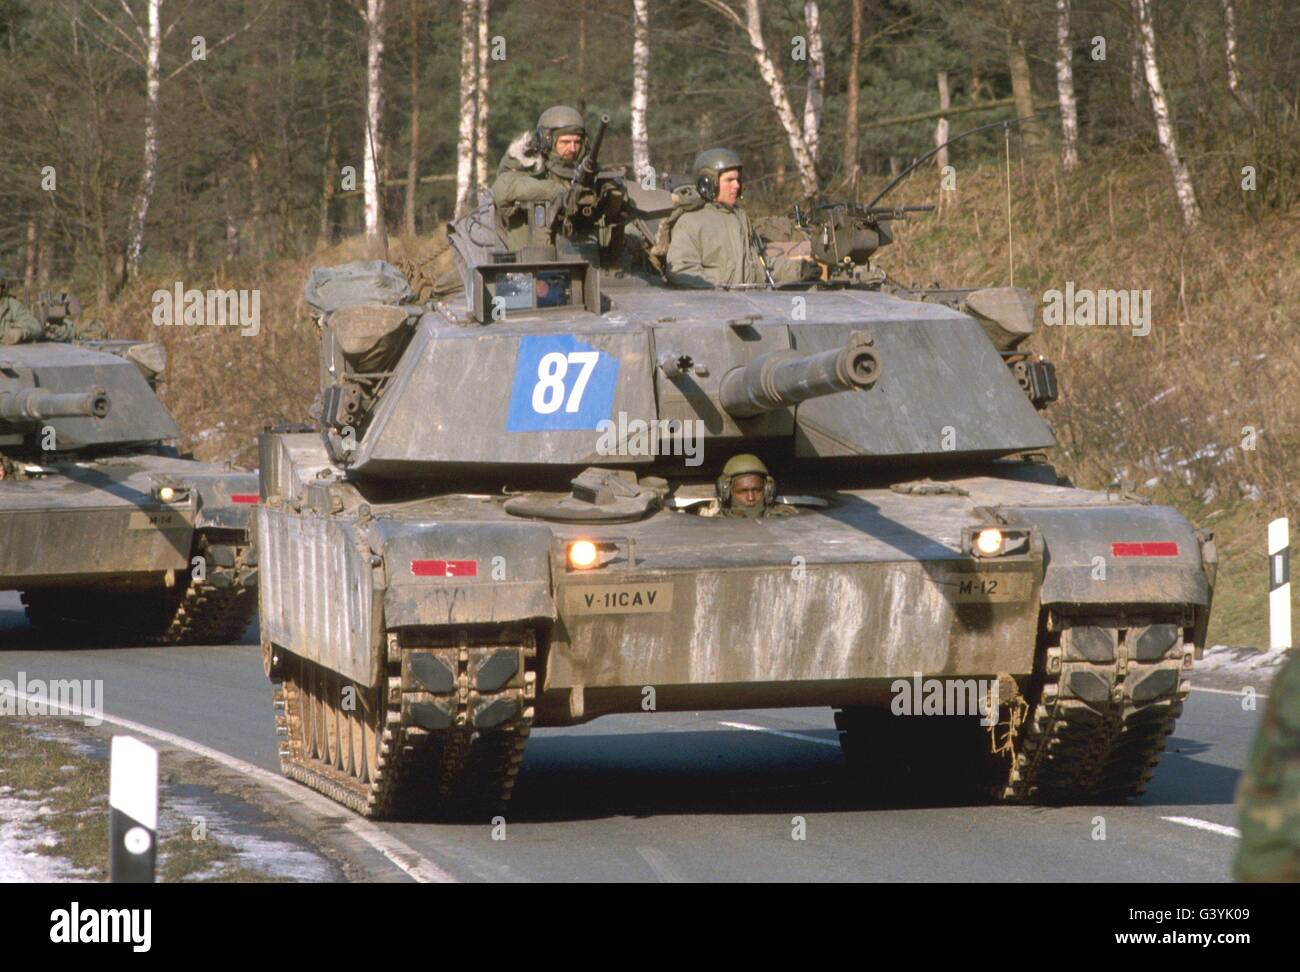 US Army, tanks M 1 'Abram' during  NATO exercises in Germany Stock Photo